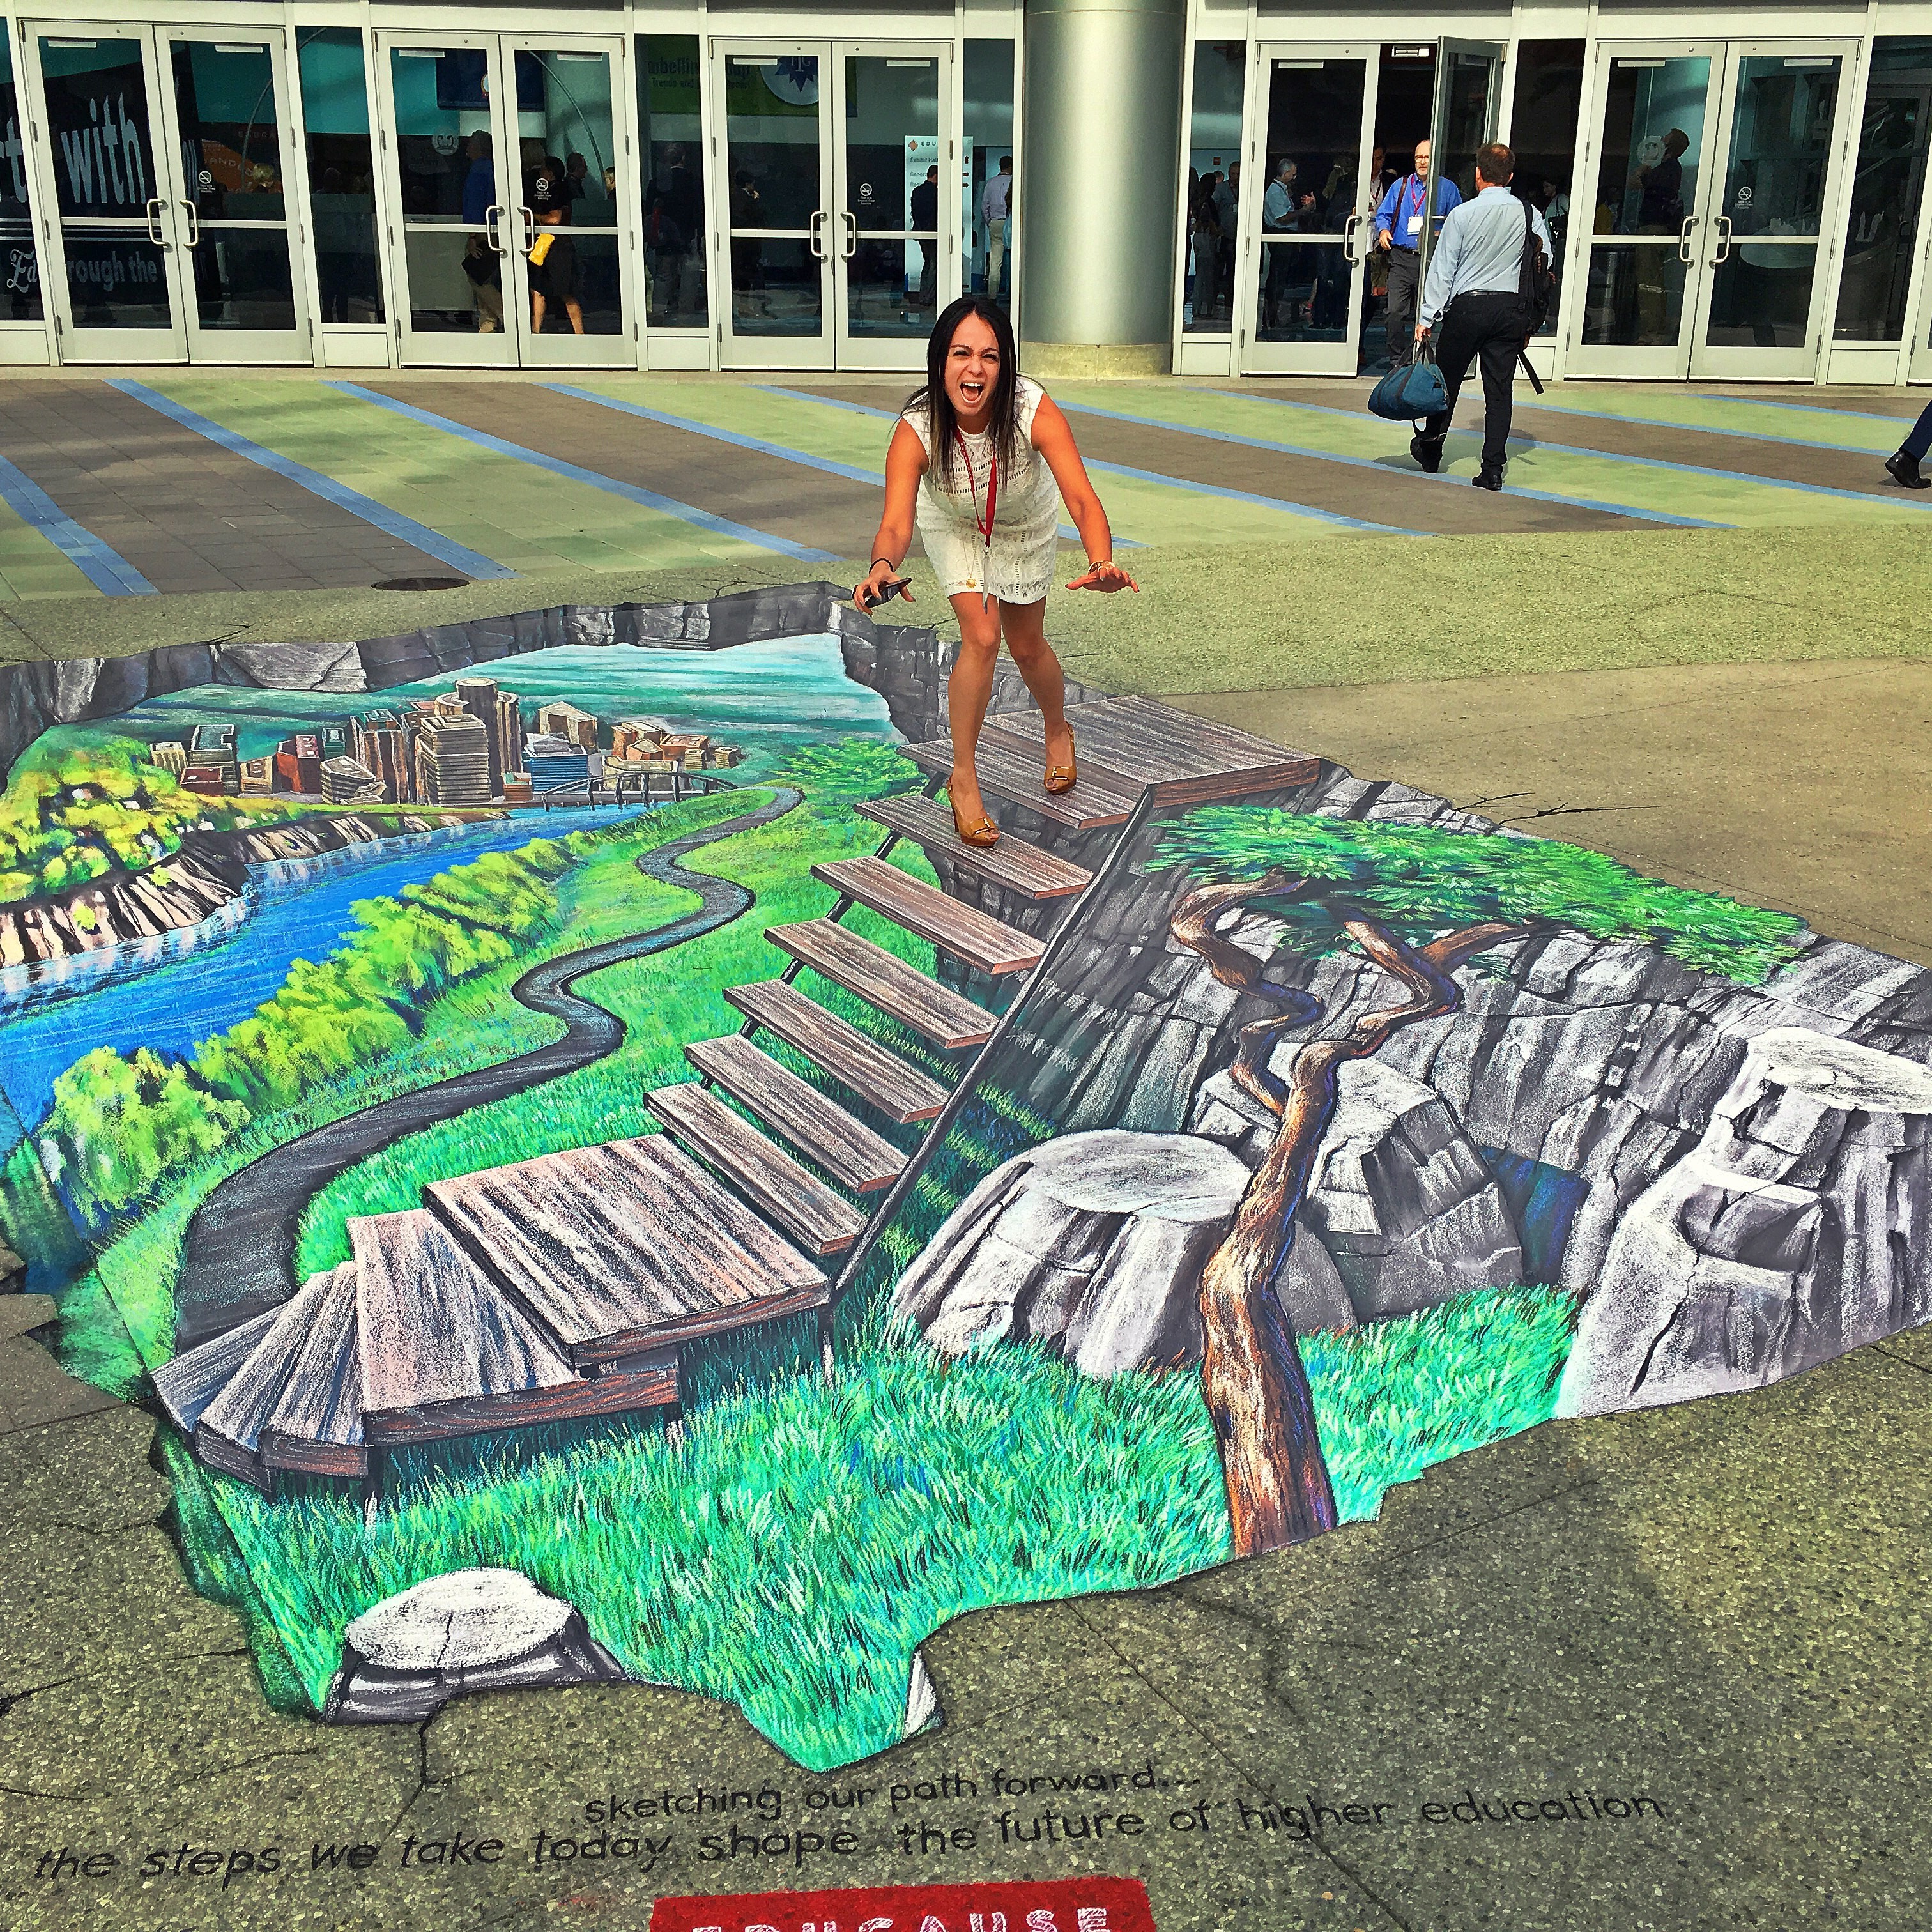 Georgetown University's Head of Library IT Services has fun with EDUCAUSE sidewalk art.